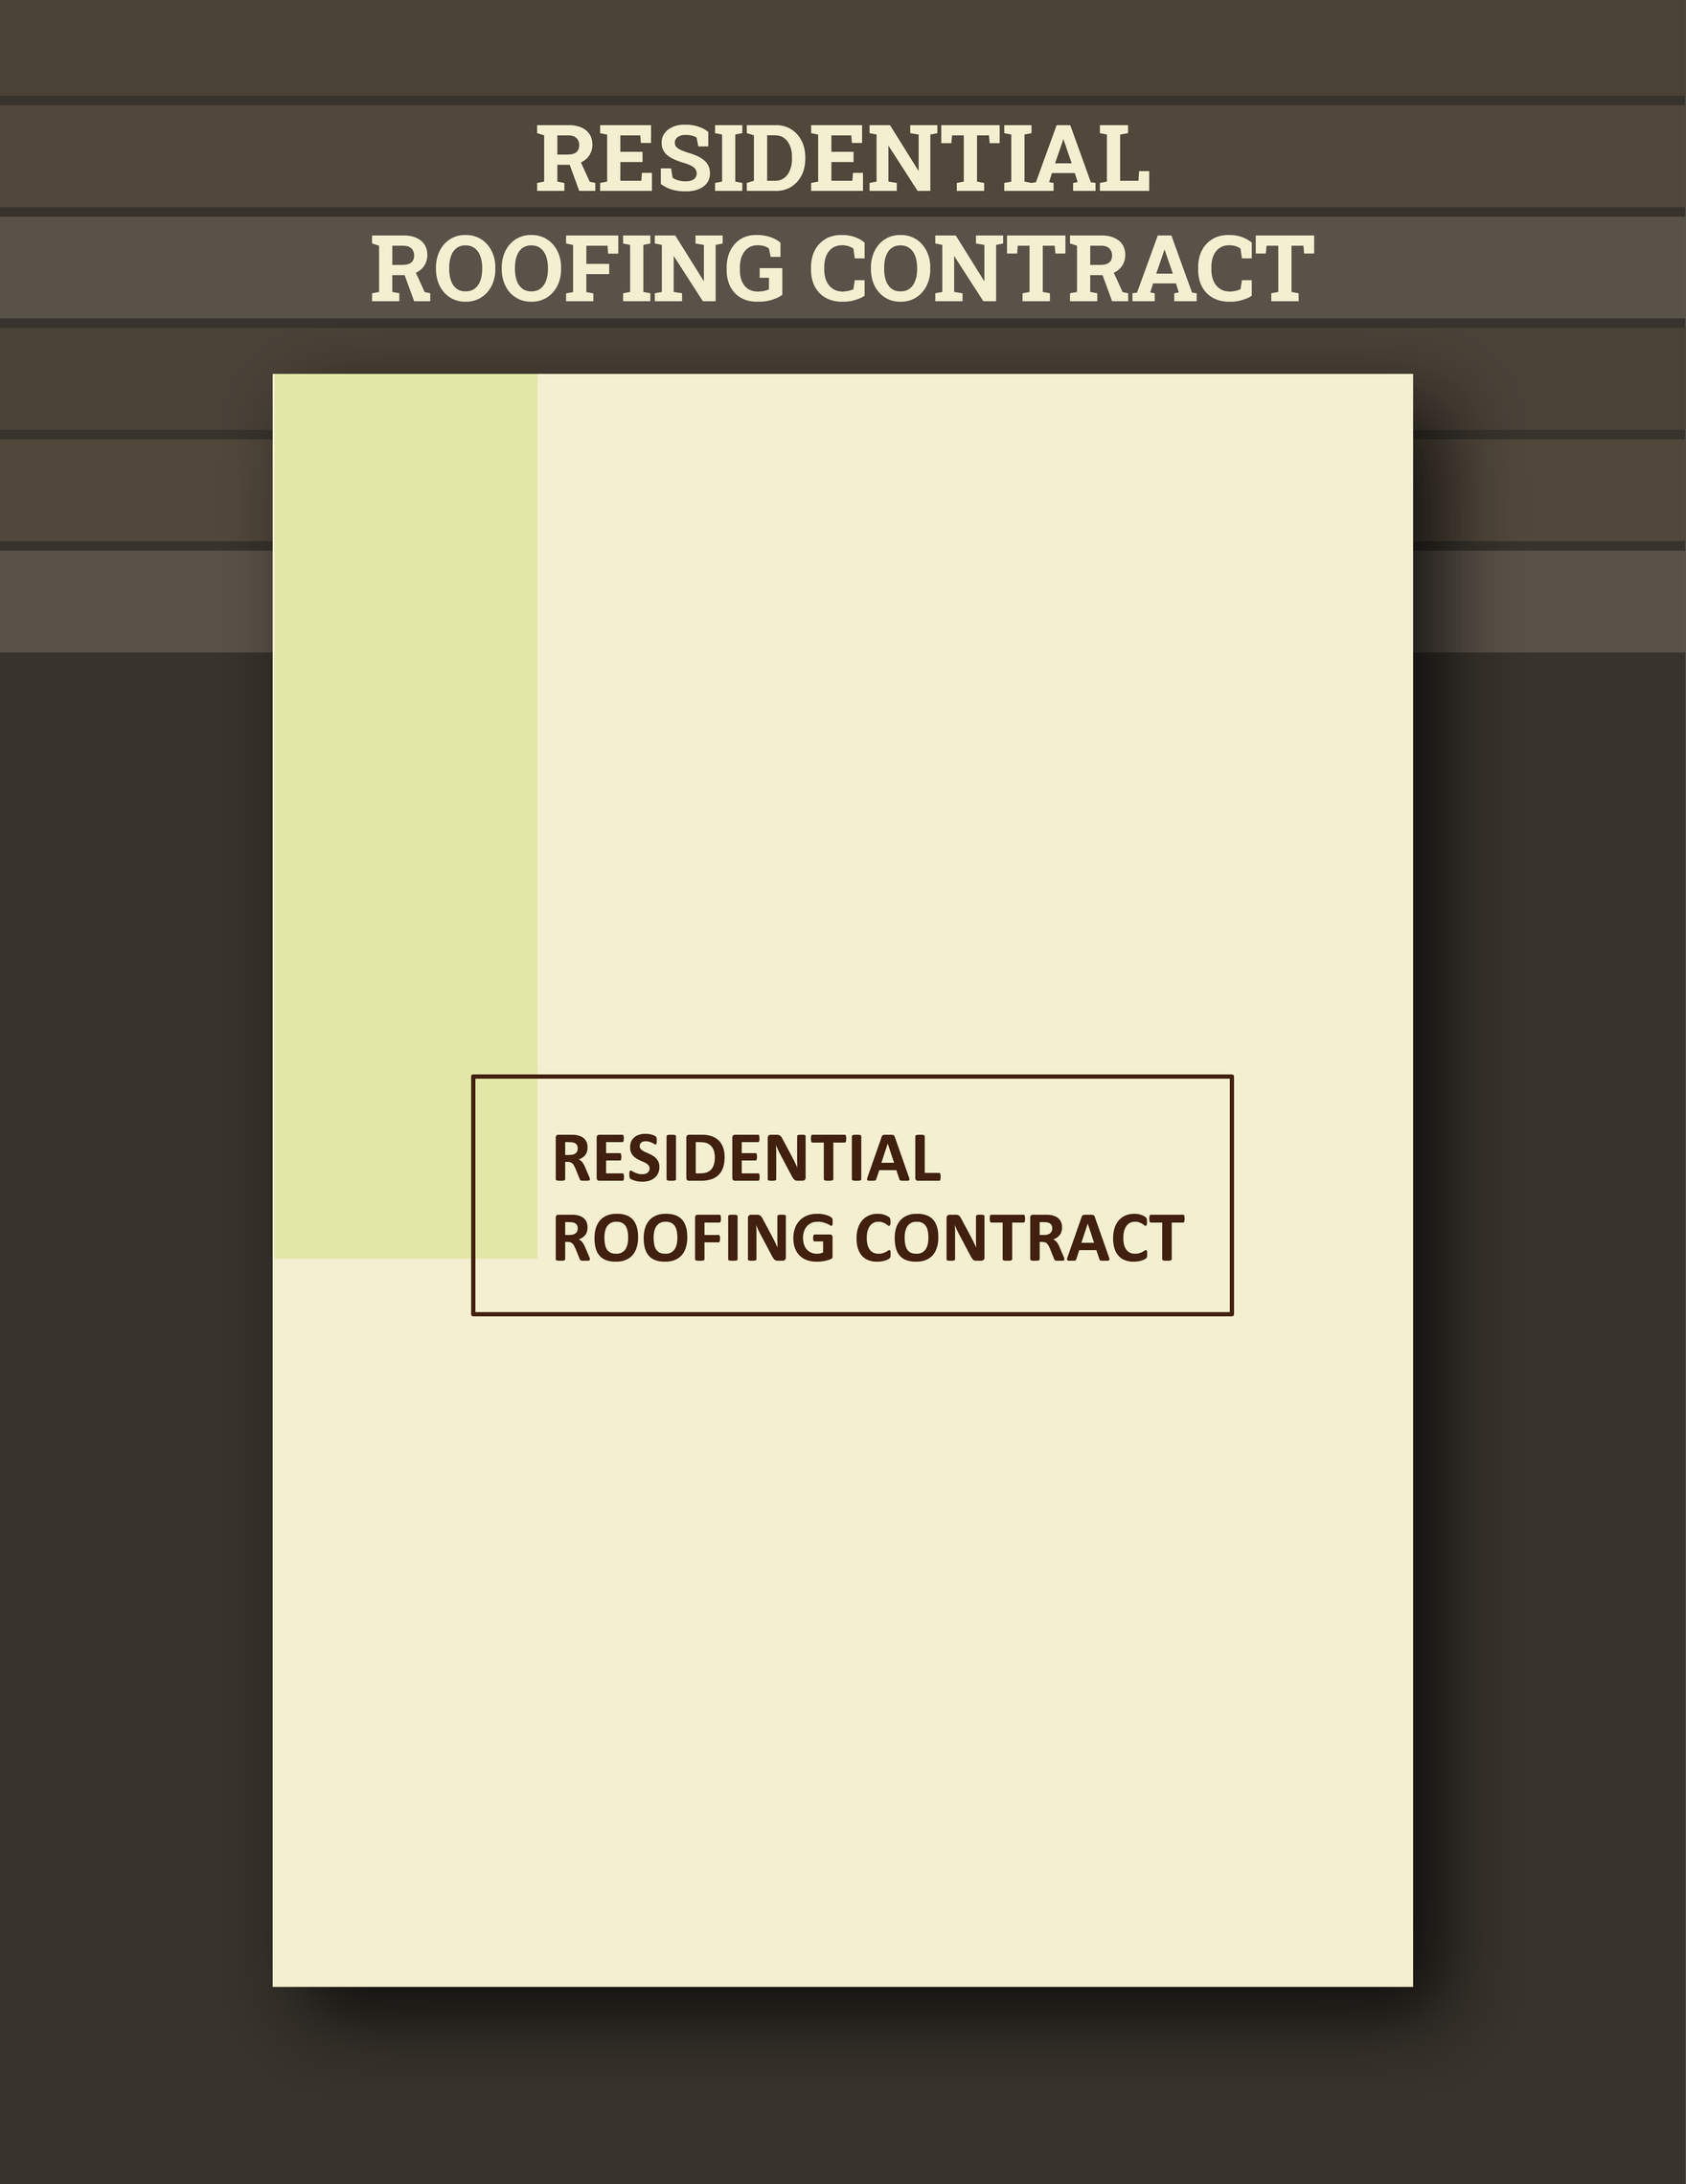 Residential Roofing Contract Template